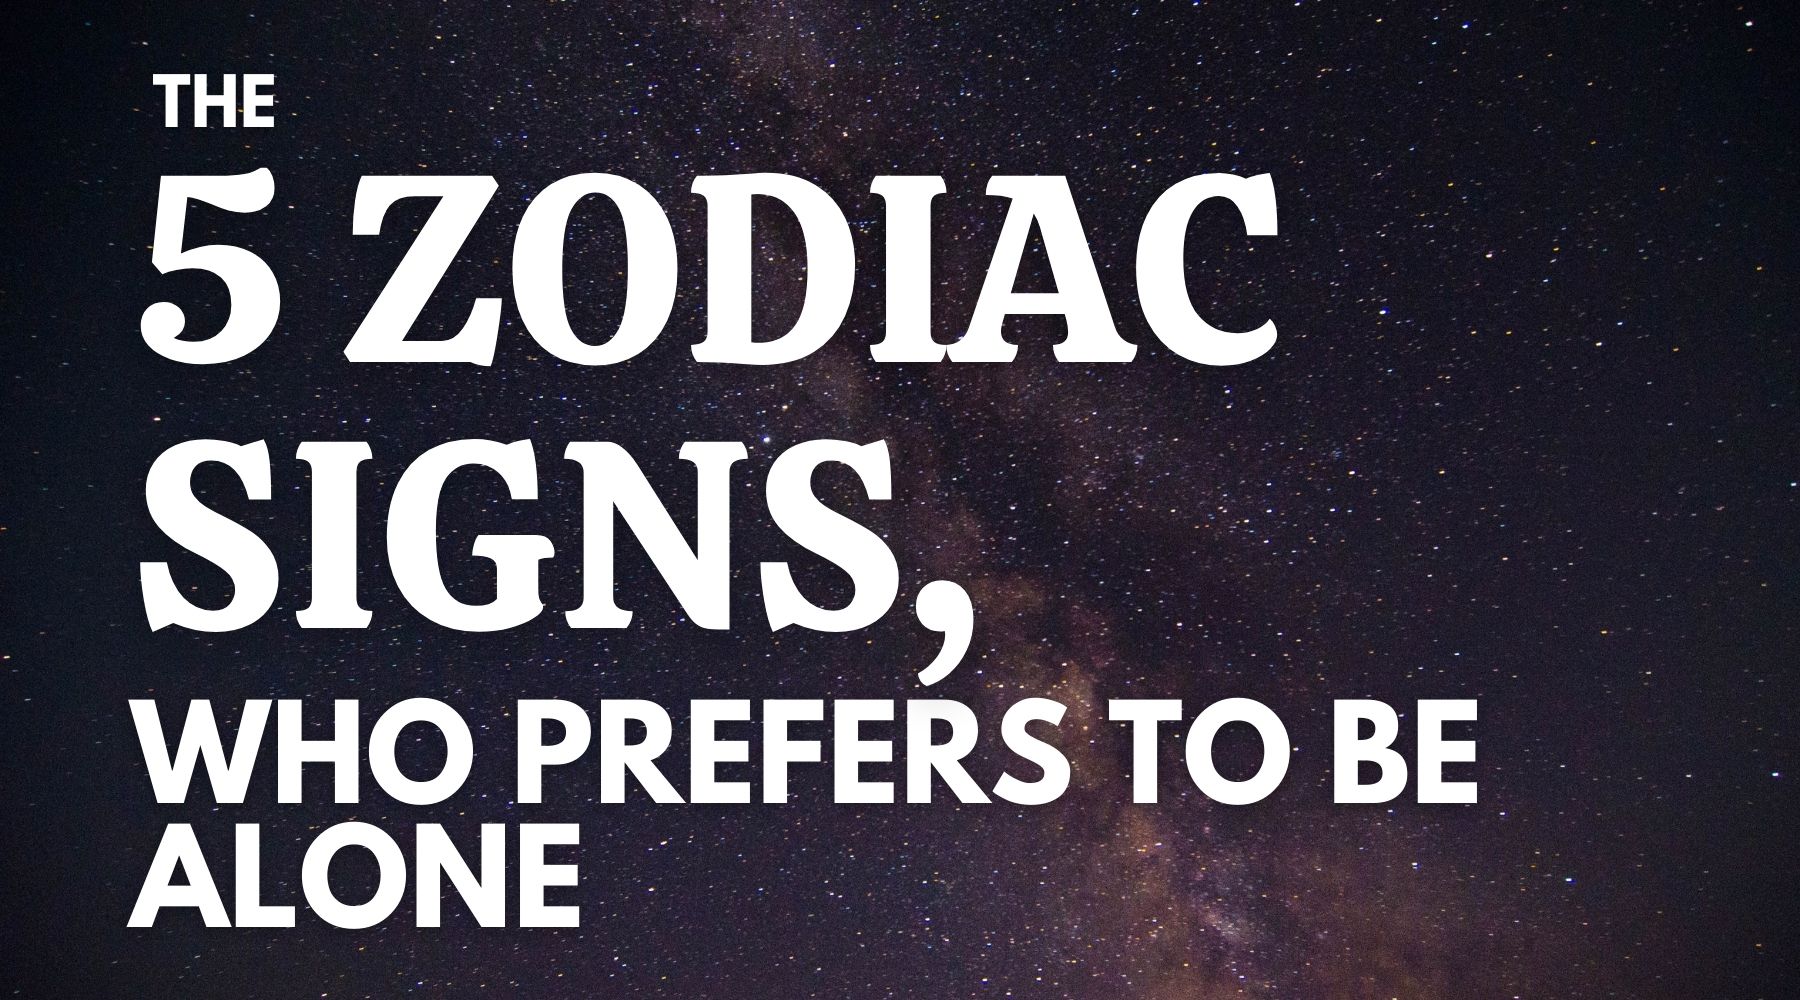 The 5 zodiac signs, who prefers to be alone